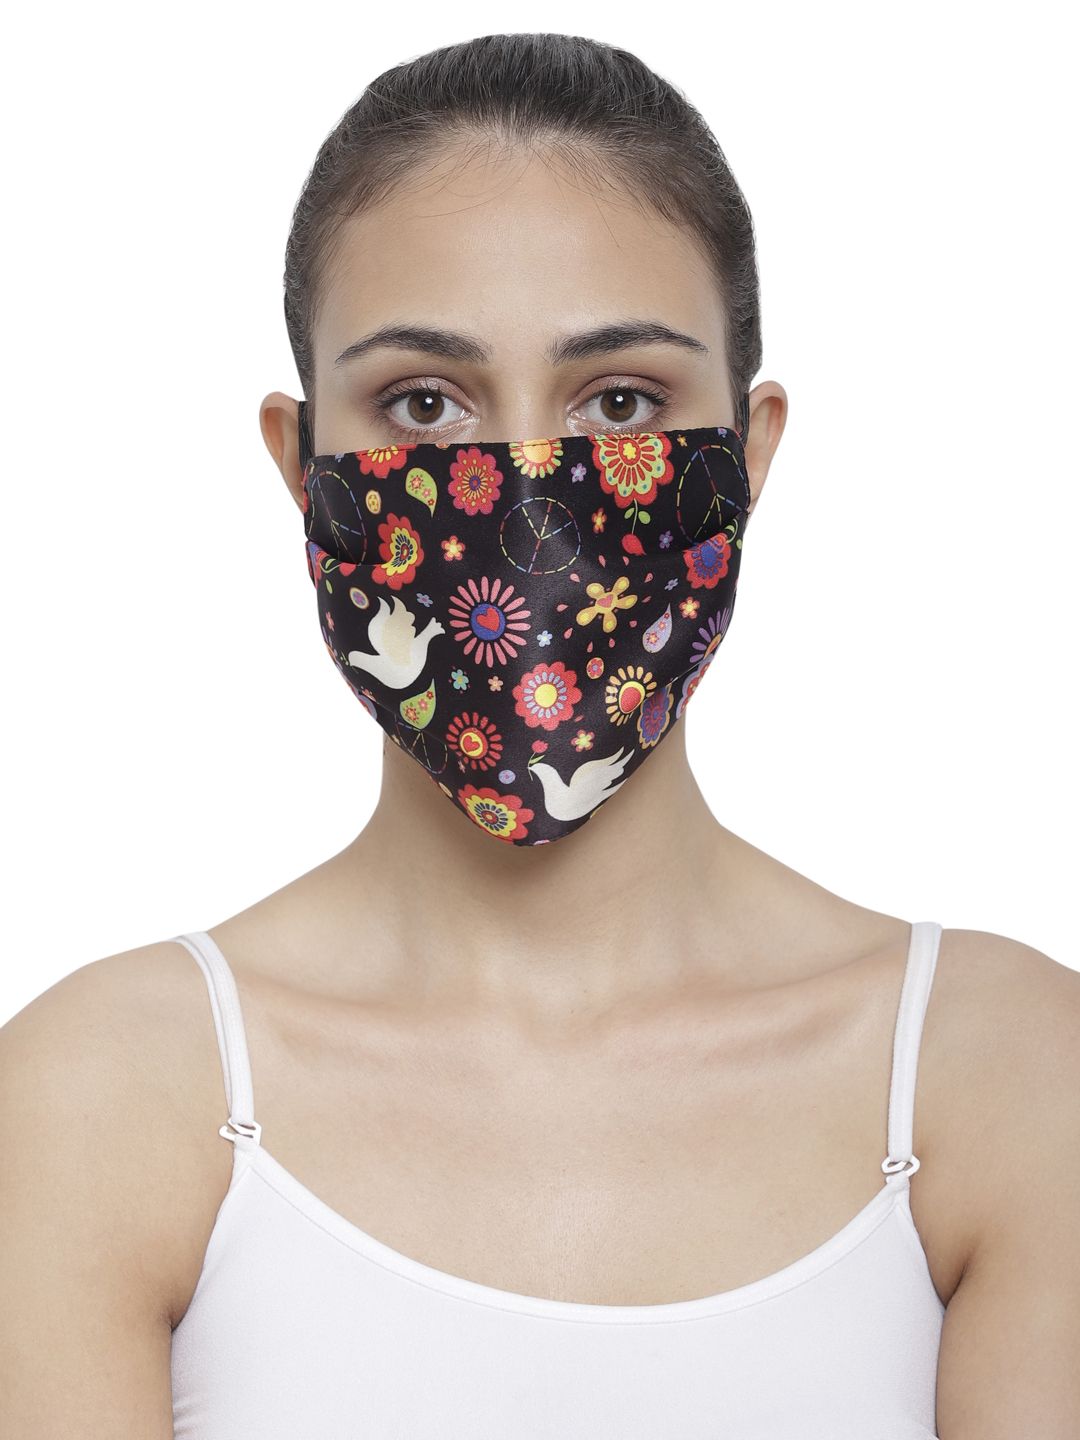 The House of Tara Unisex Multicoloured Printed 3-Ply Reusable Wrinkle-Free Fabric Mask Price in India